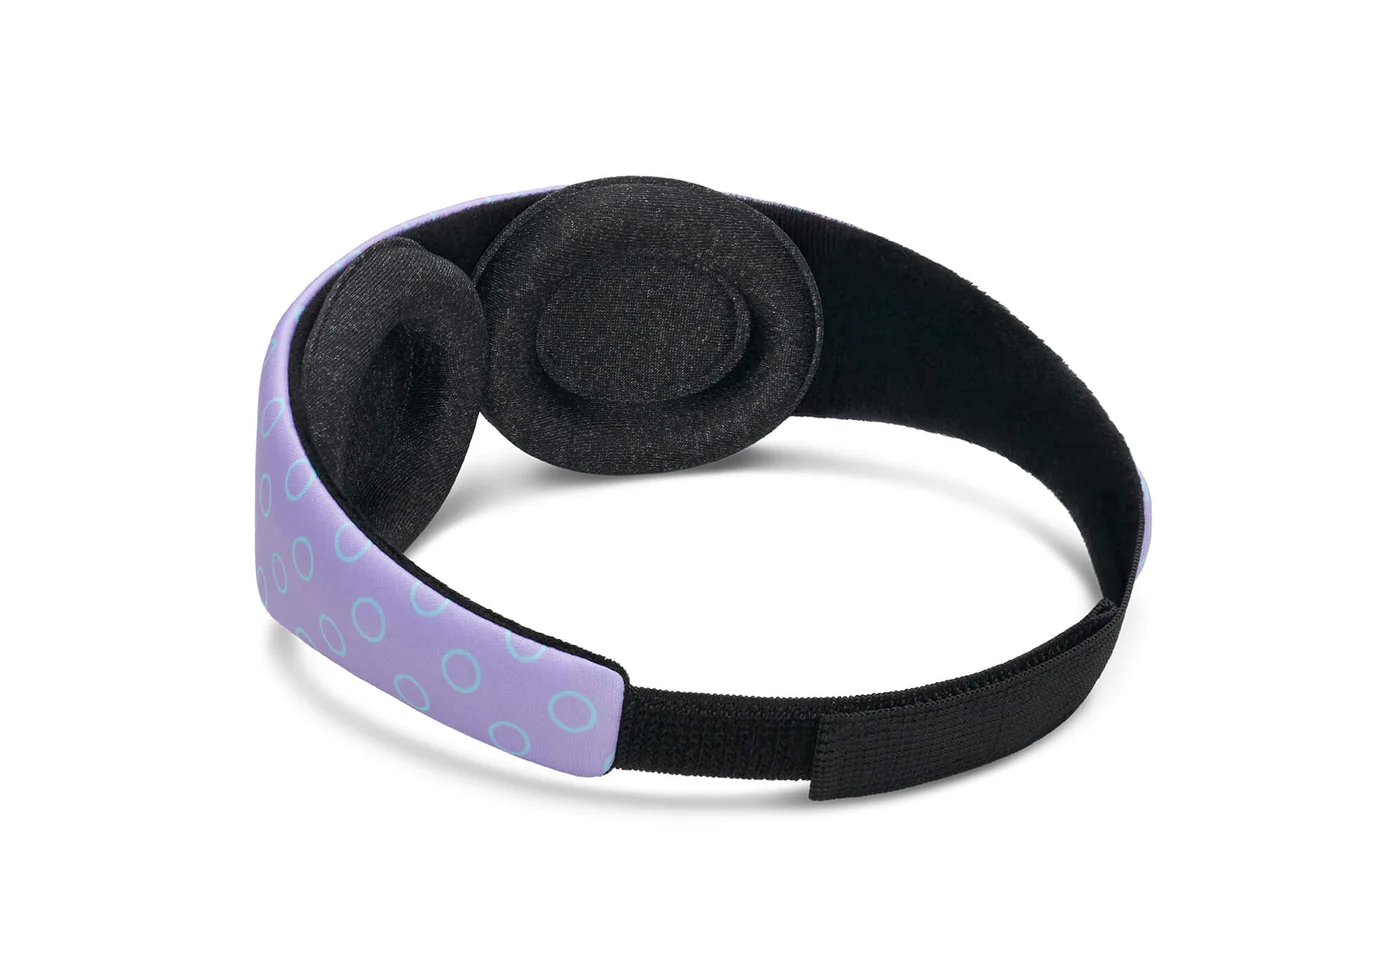 The interior of a purple sleep mask for kids with black eye cups.